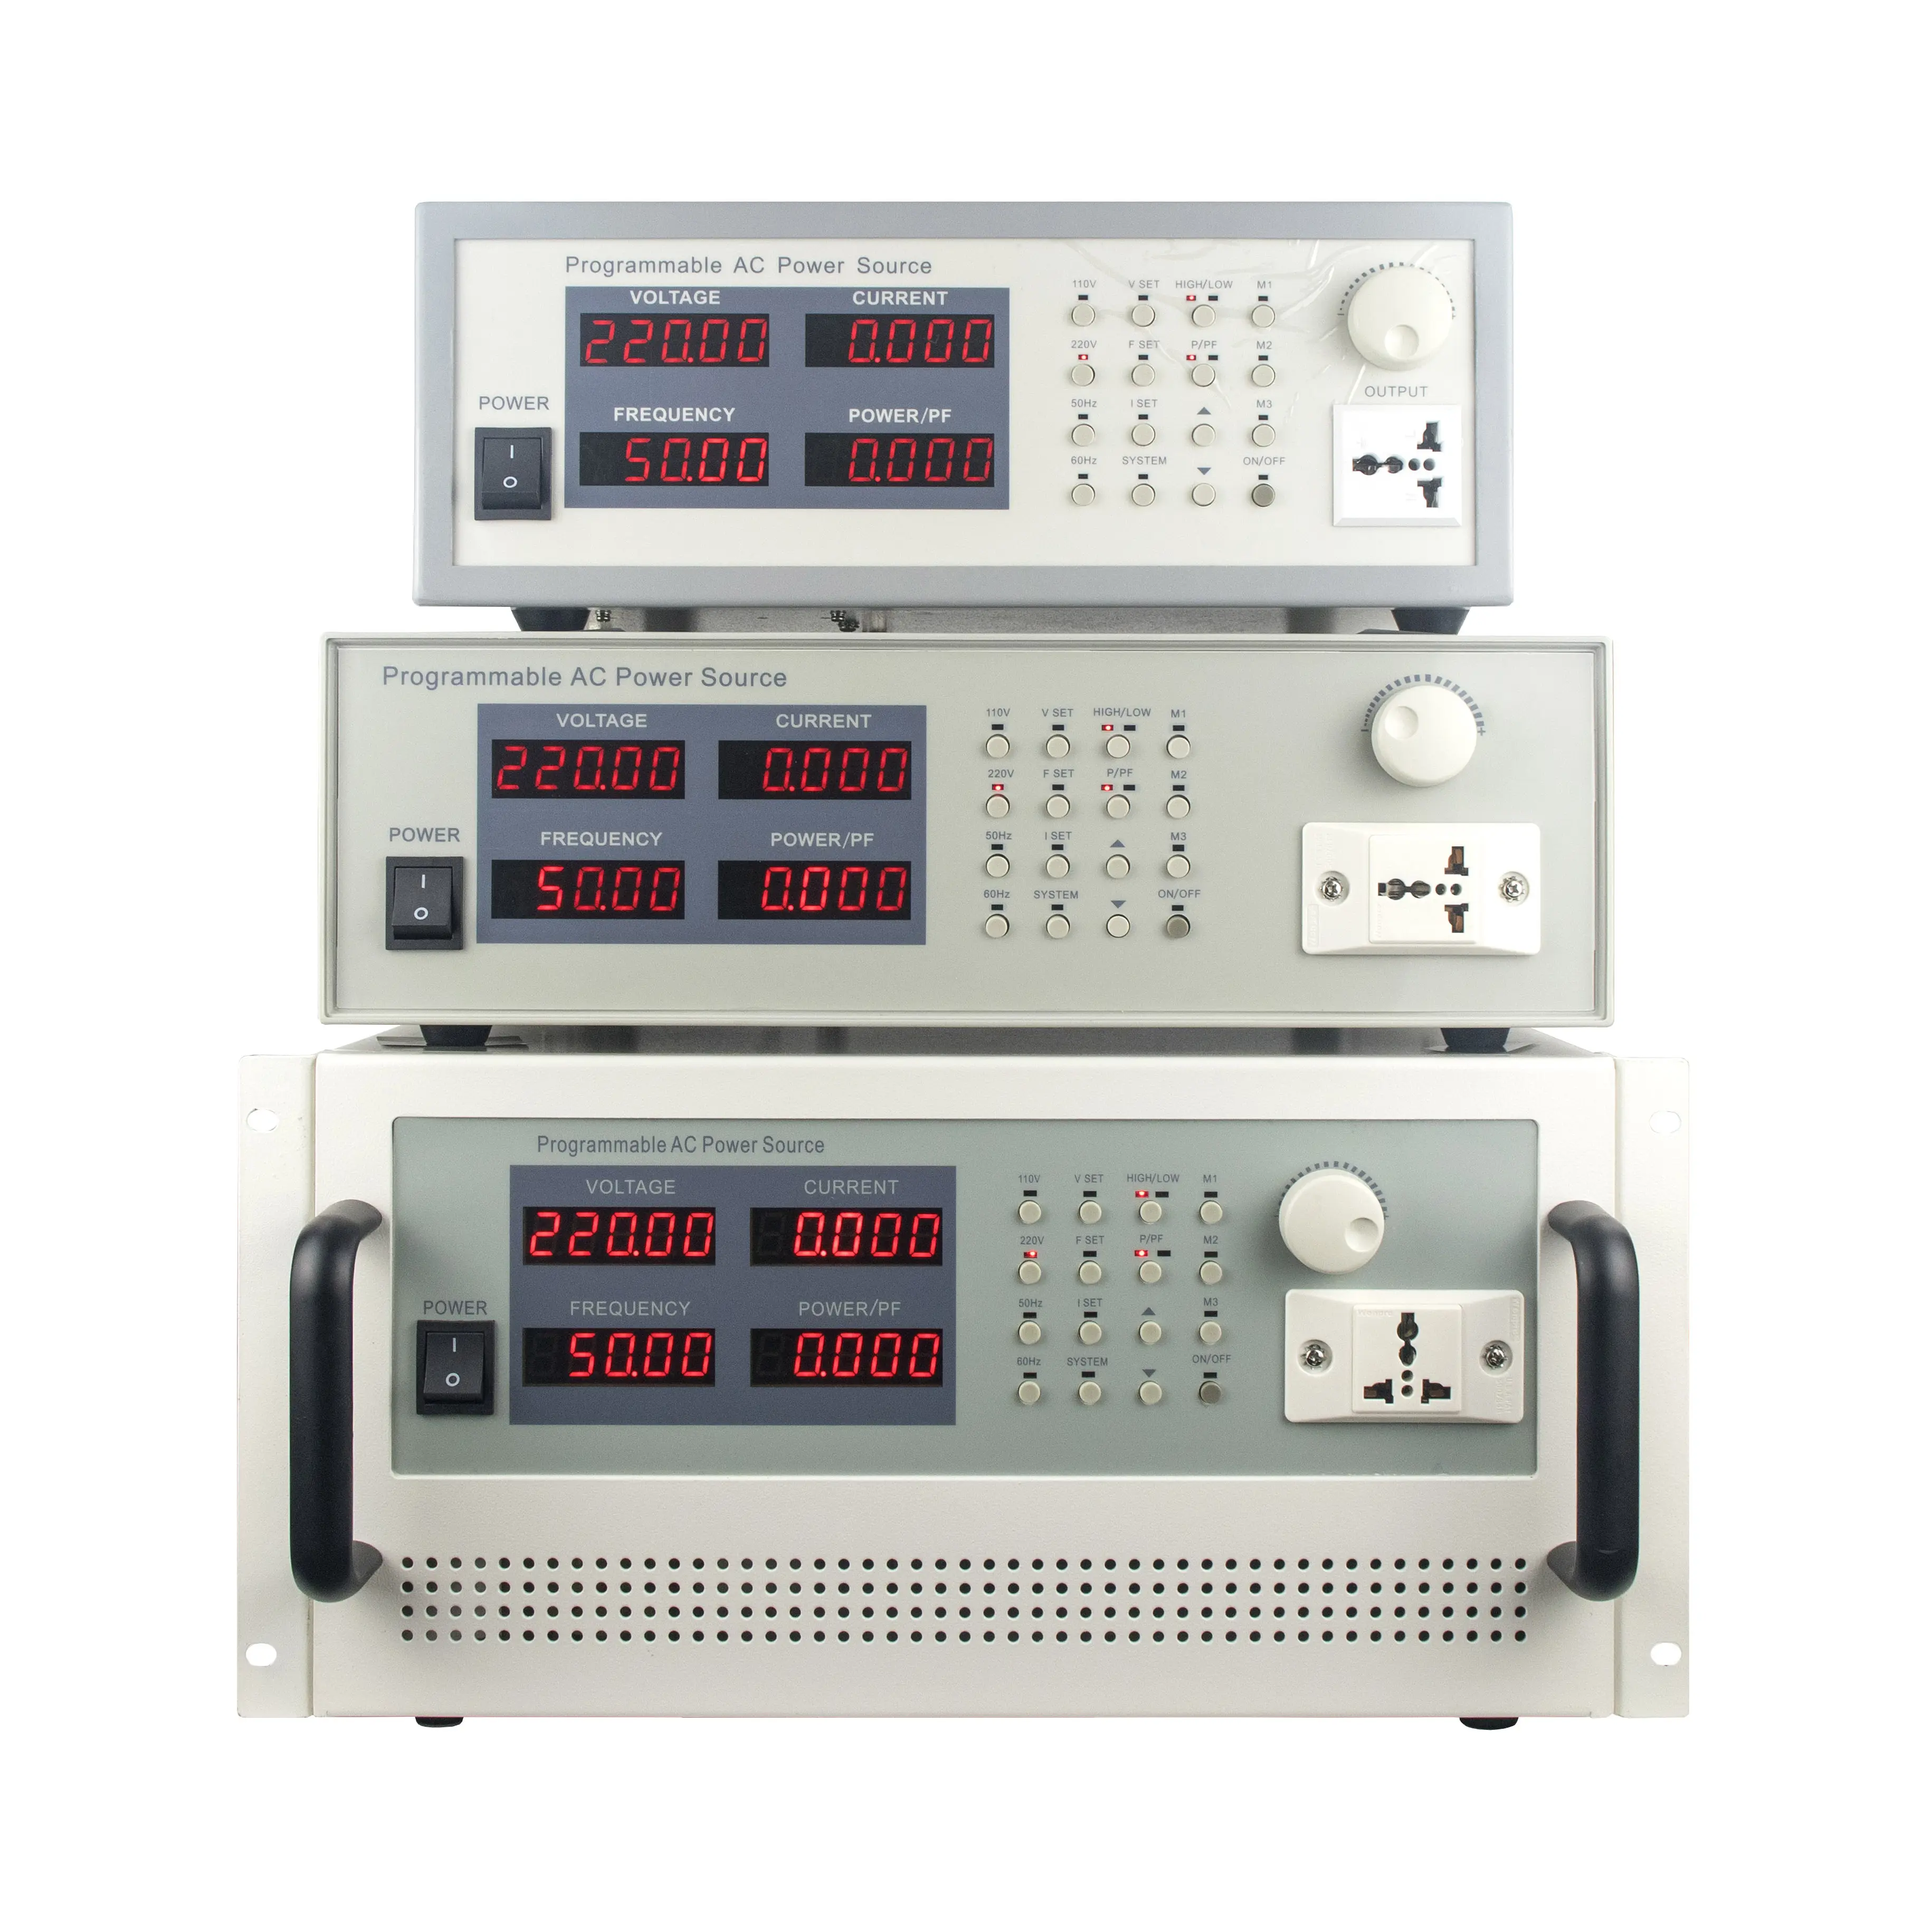 APS-5103 3KVA 220V 50Hz 60Hz Single Phase Lab Programmable Variable frequency AC Power Source